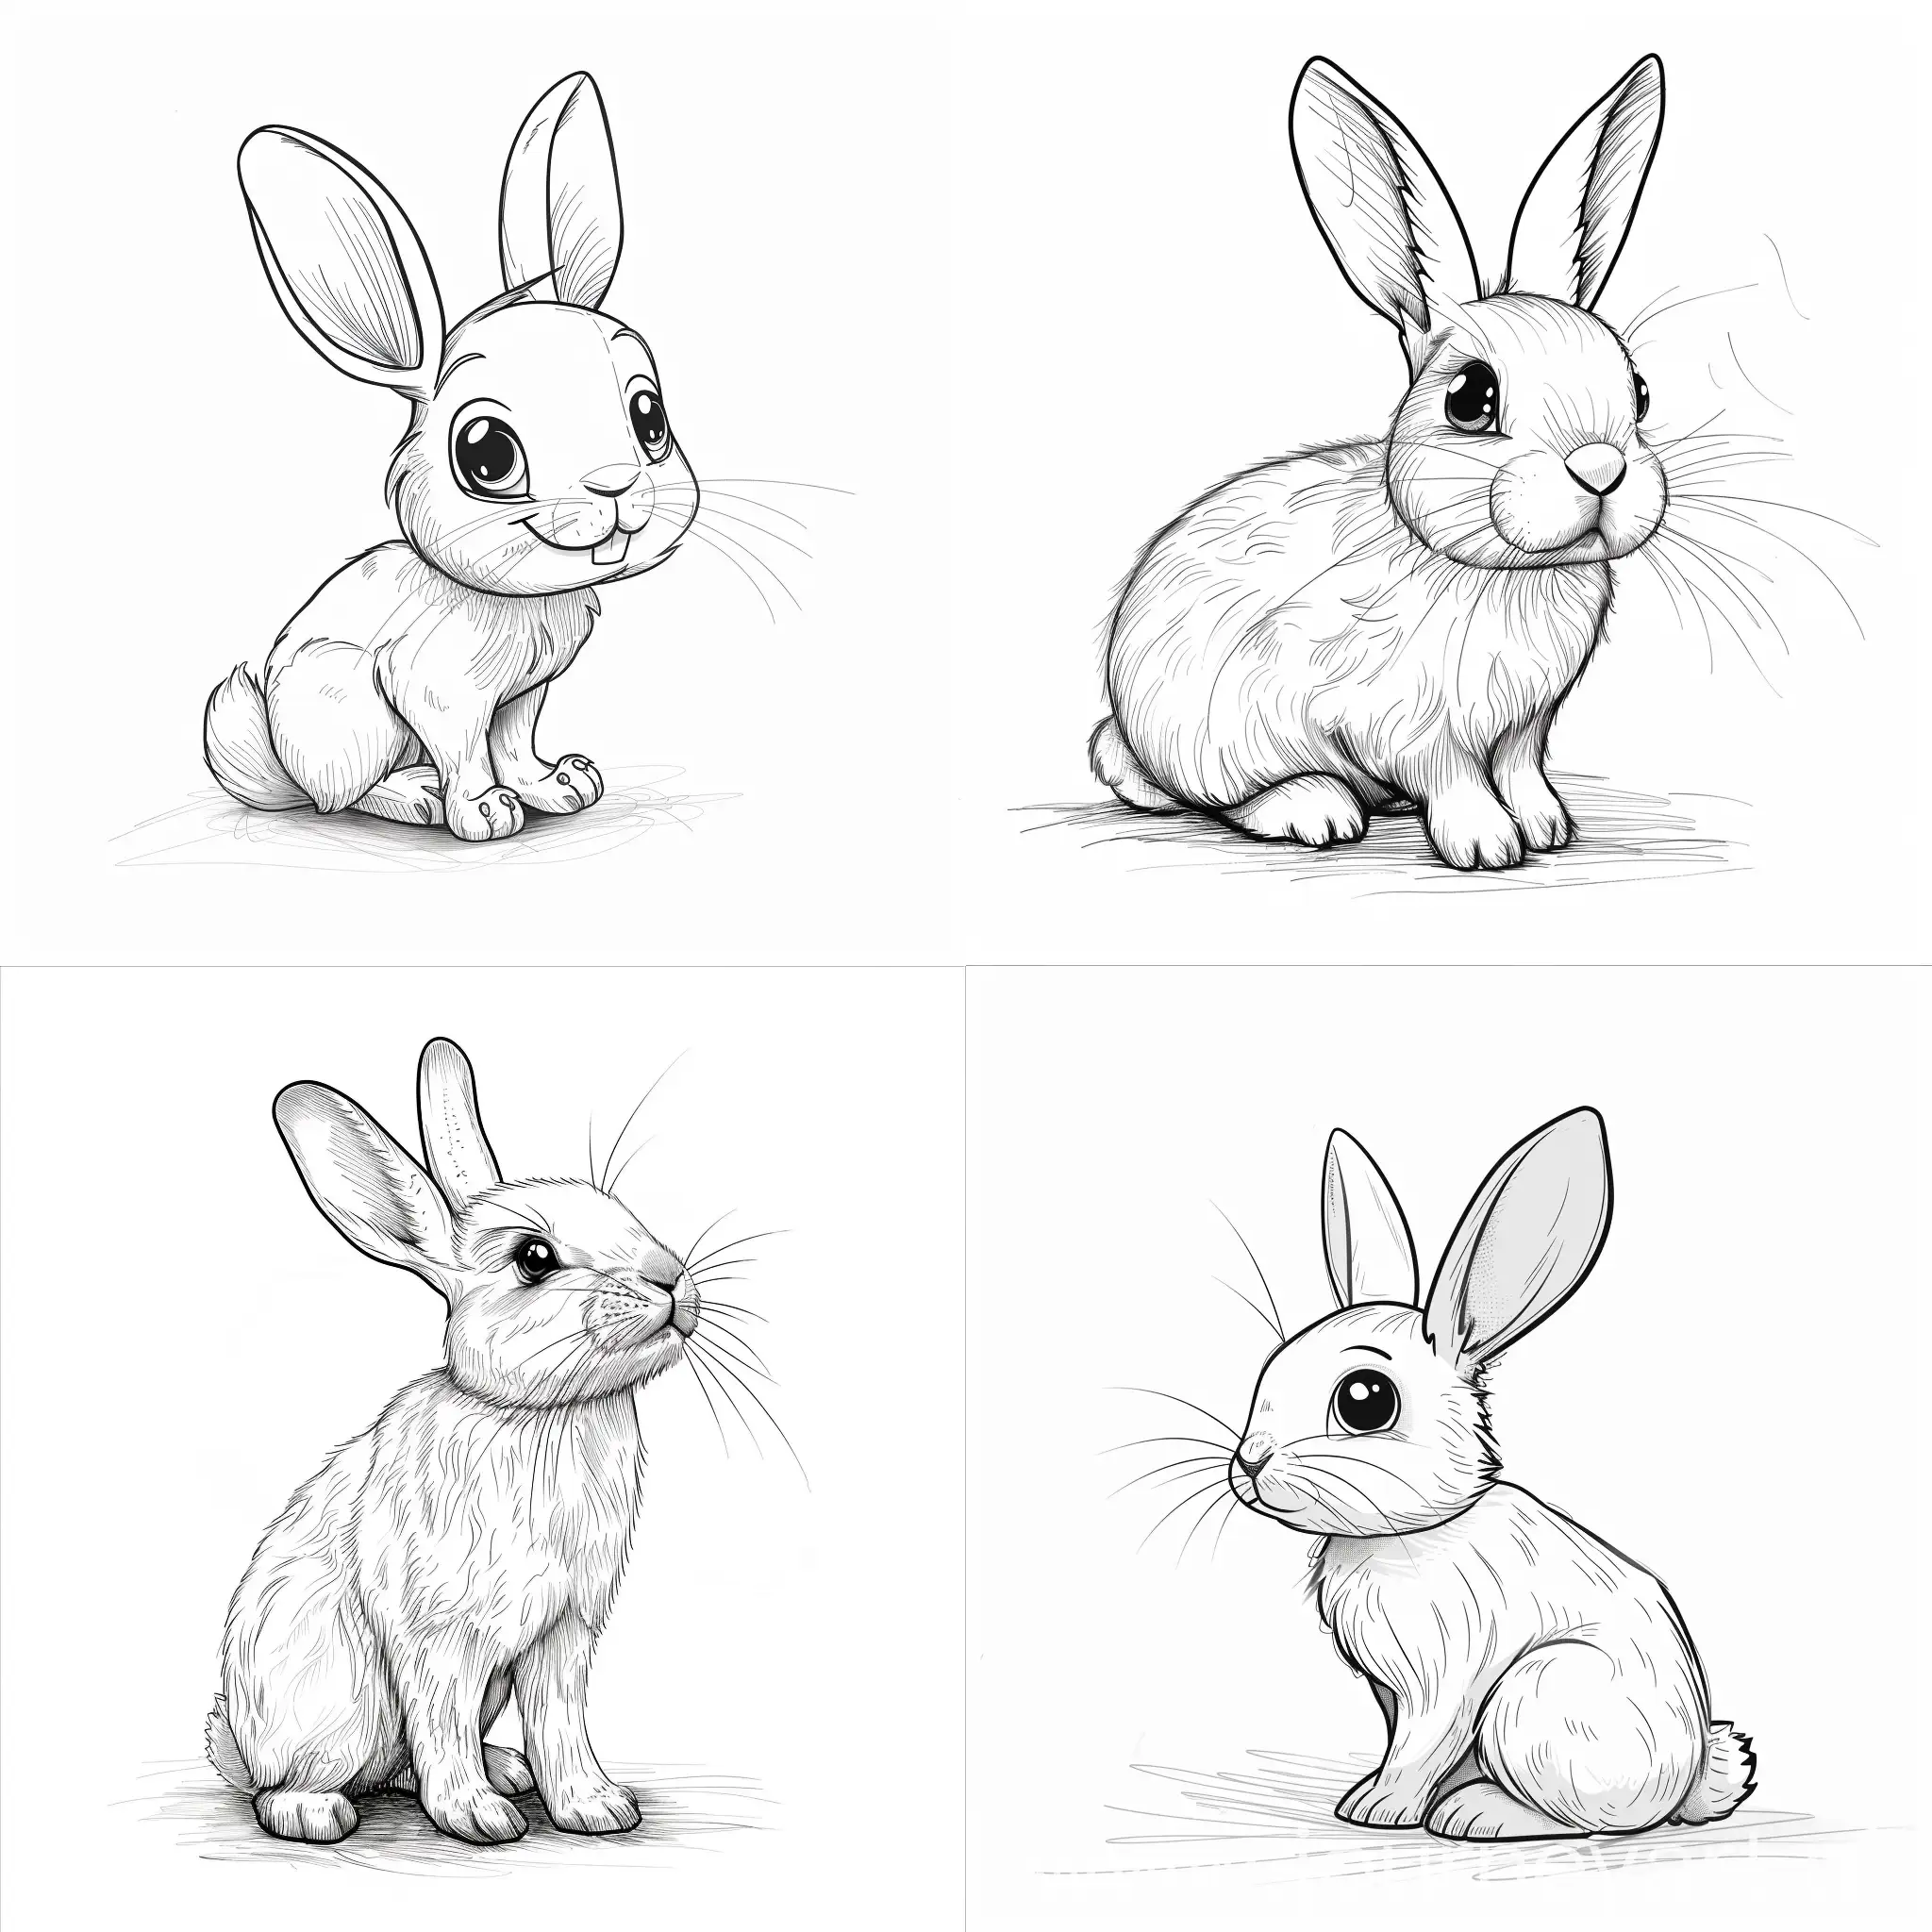 Adorable-Rabbit-Coloring-Page-for-Kids-on-a-Clean-White-Background